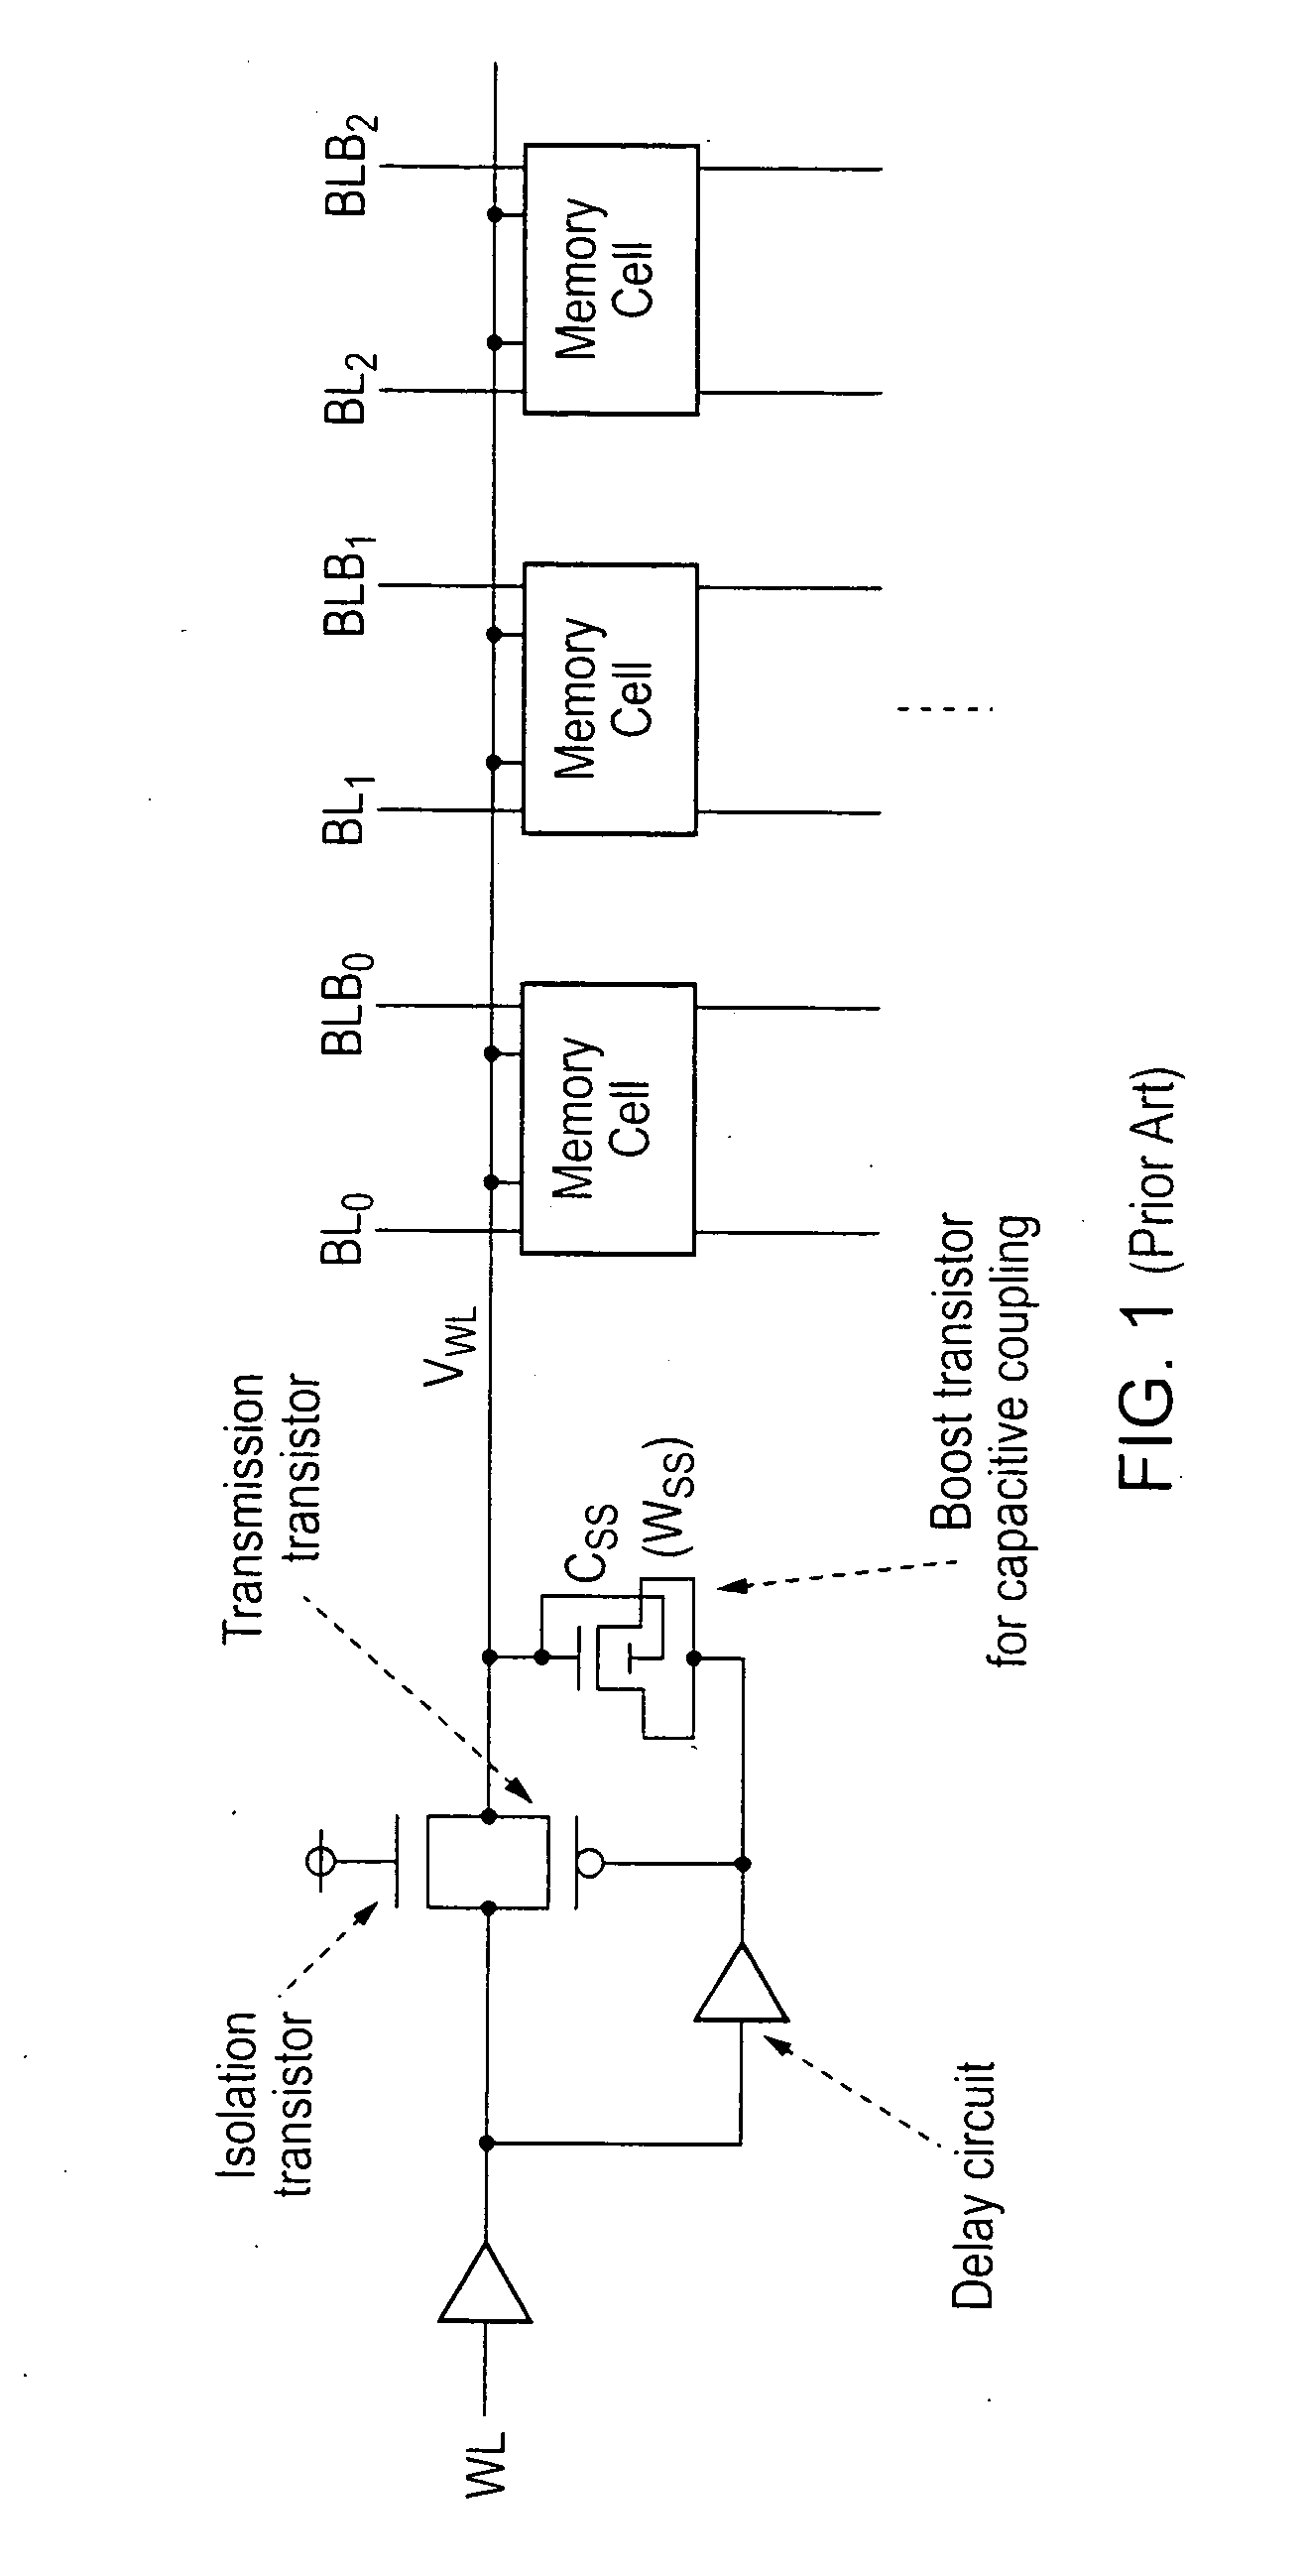 Boosting voltage levels applied to an access control line when accessing storage cells in a memory